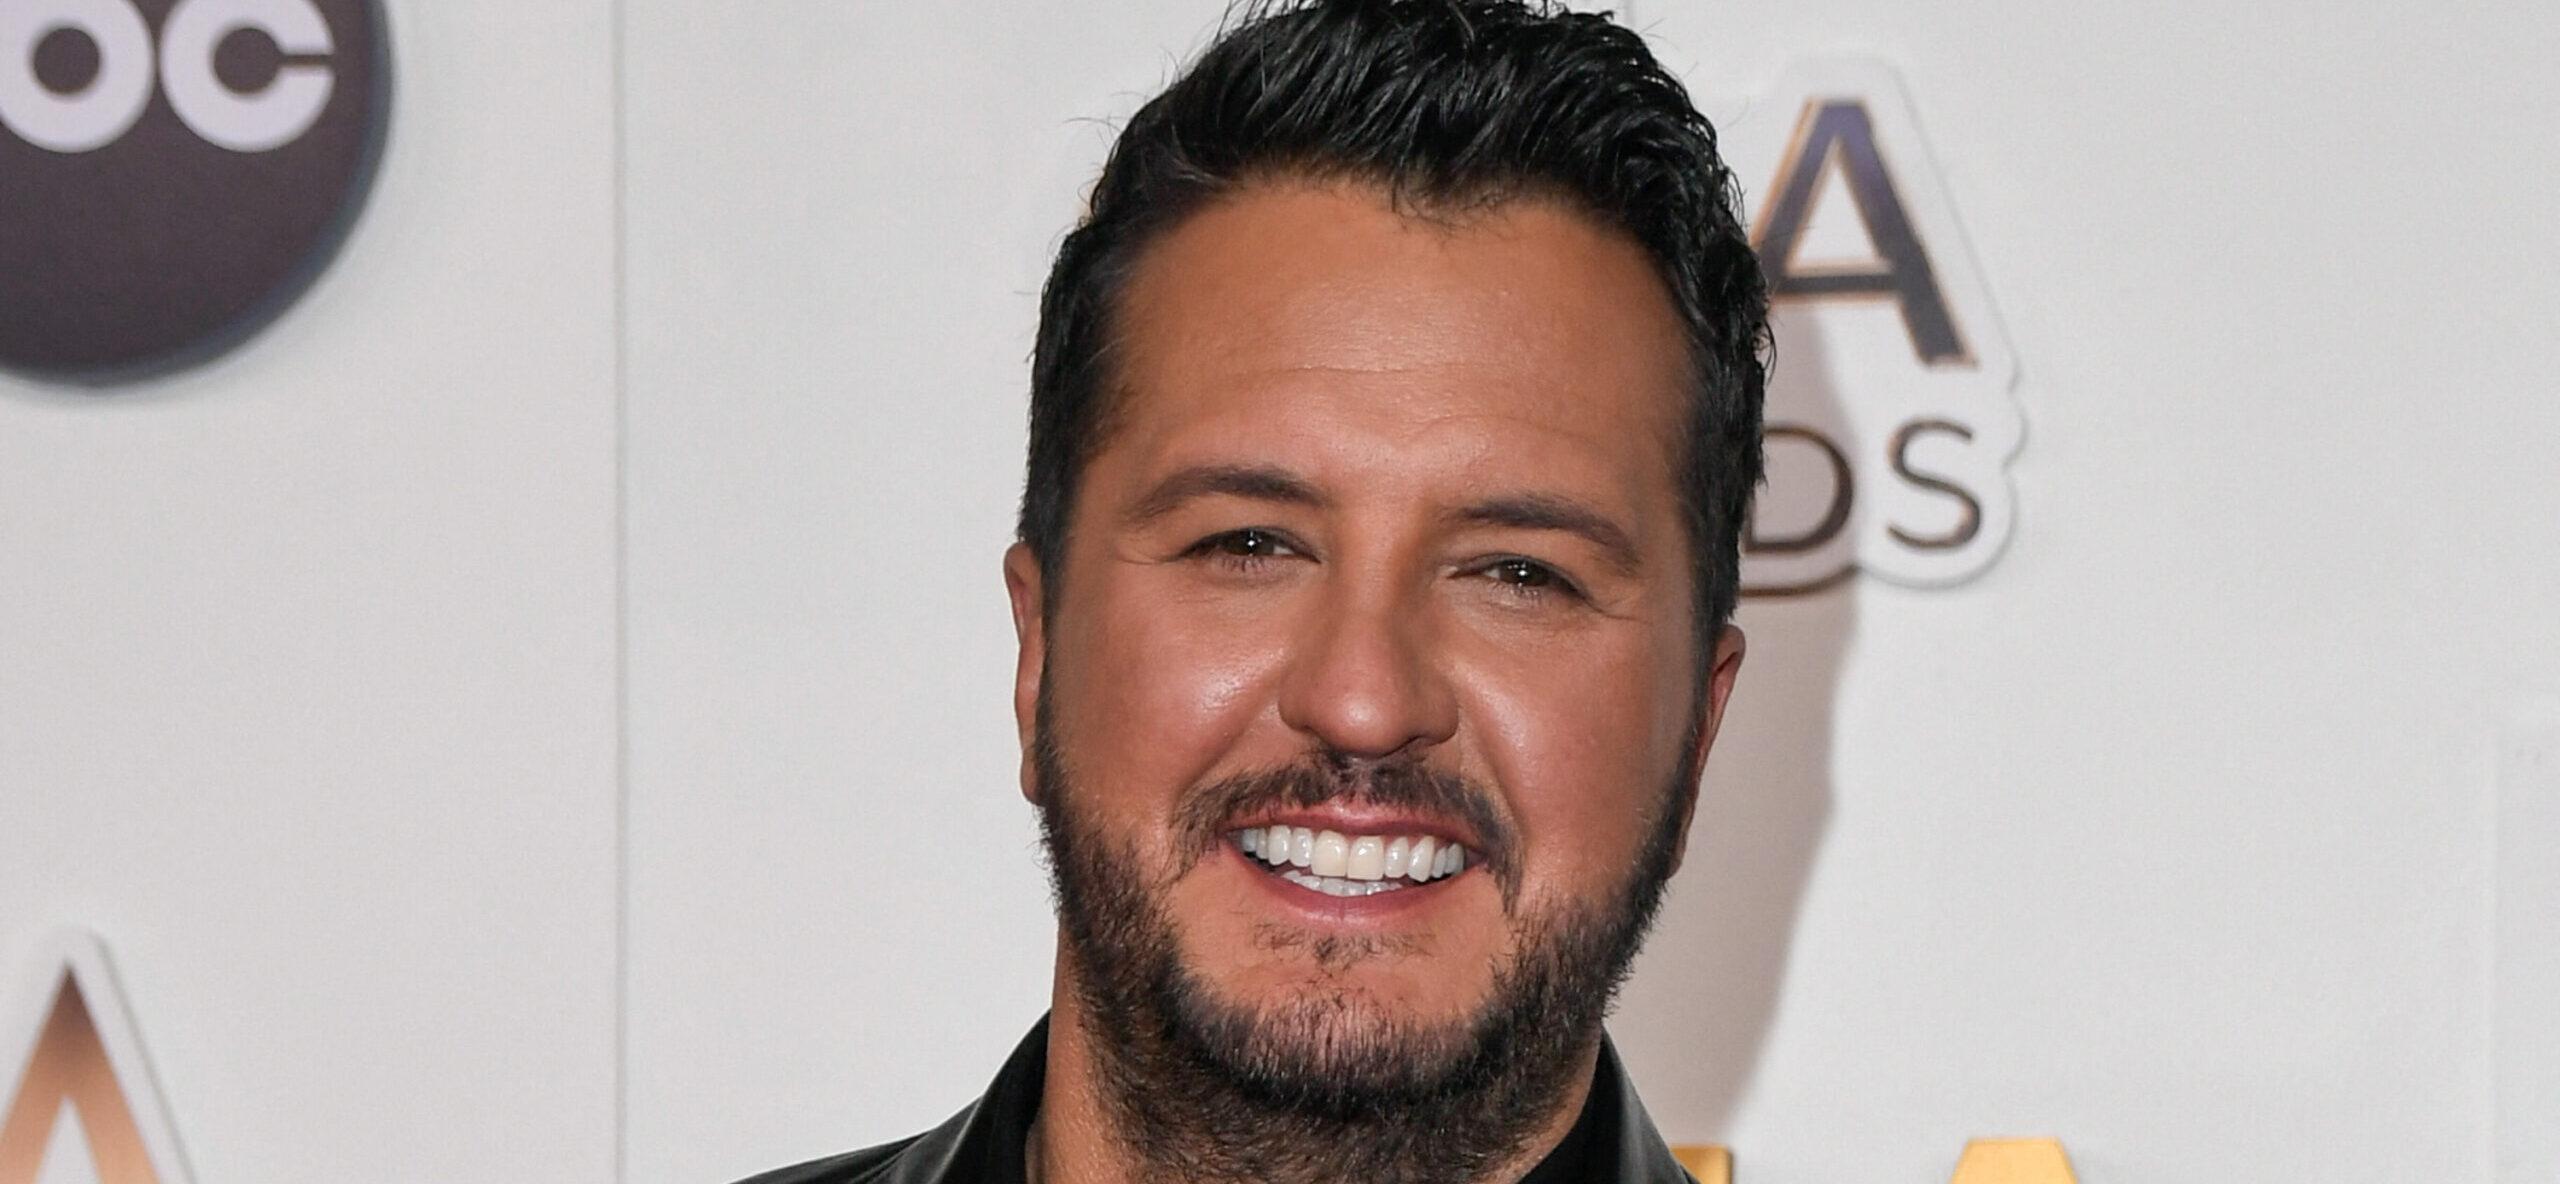 Man Who Was Kicked Out Of Luke Bryan’s Bar Has Been Missing For Days